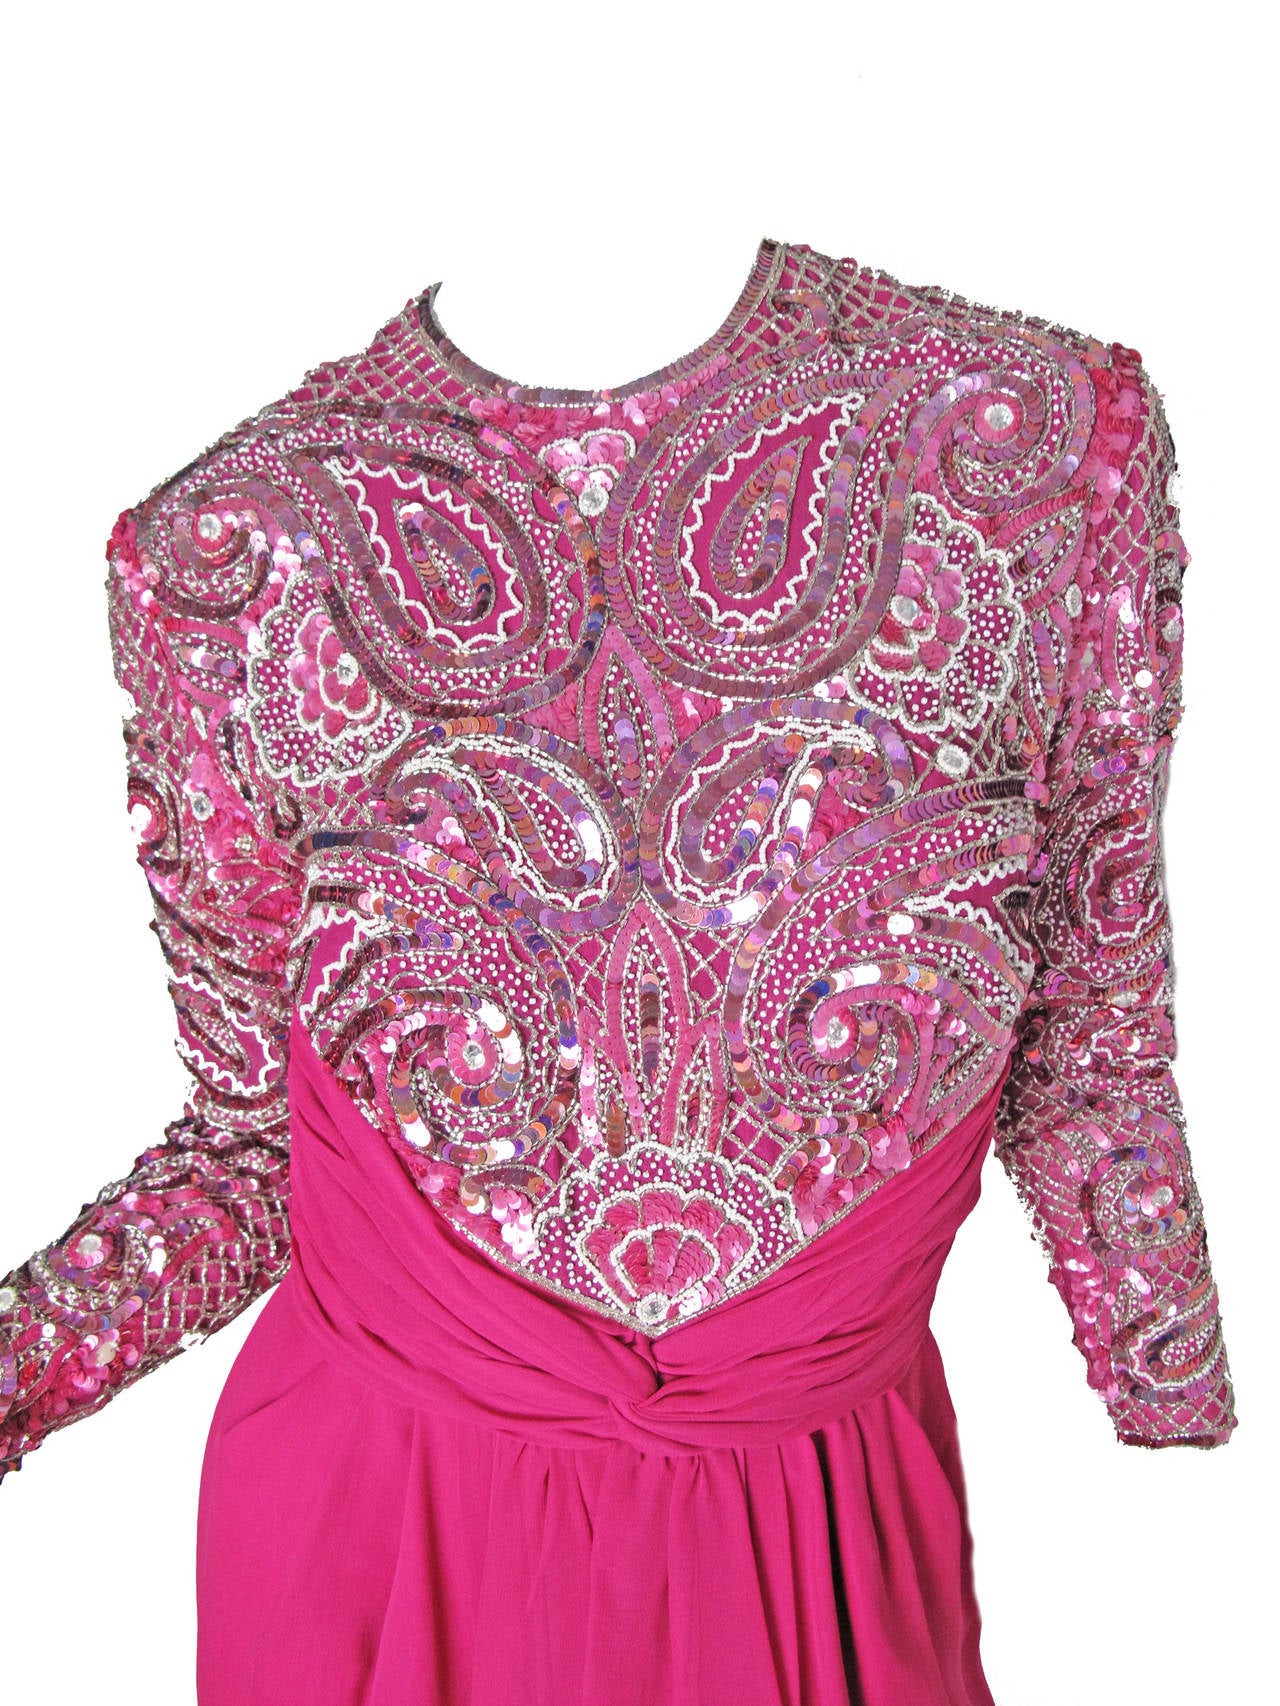 Women's 1980s Naeem Khan Riazee Nights Fuchsia Silk Gown with Beading and Sequins